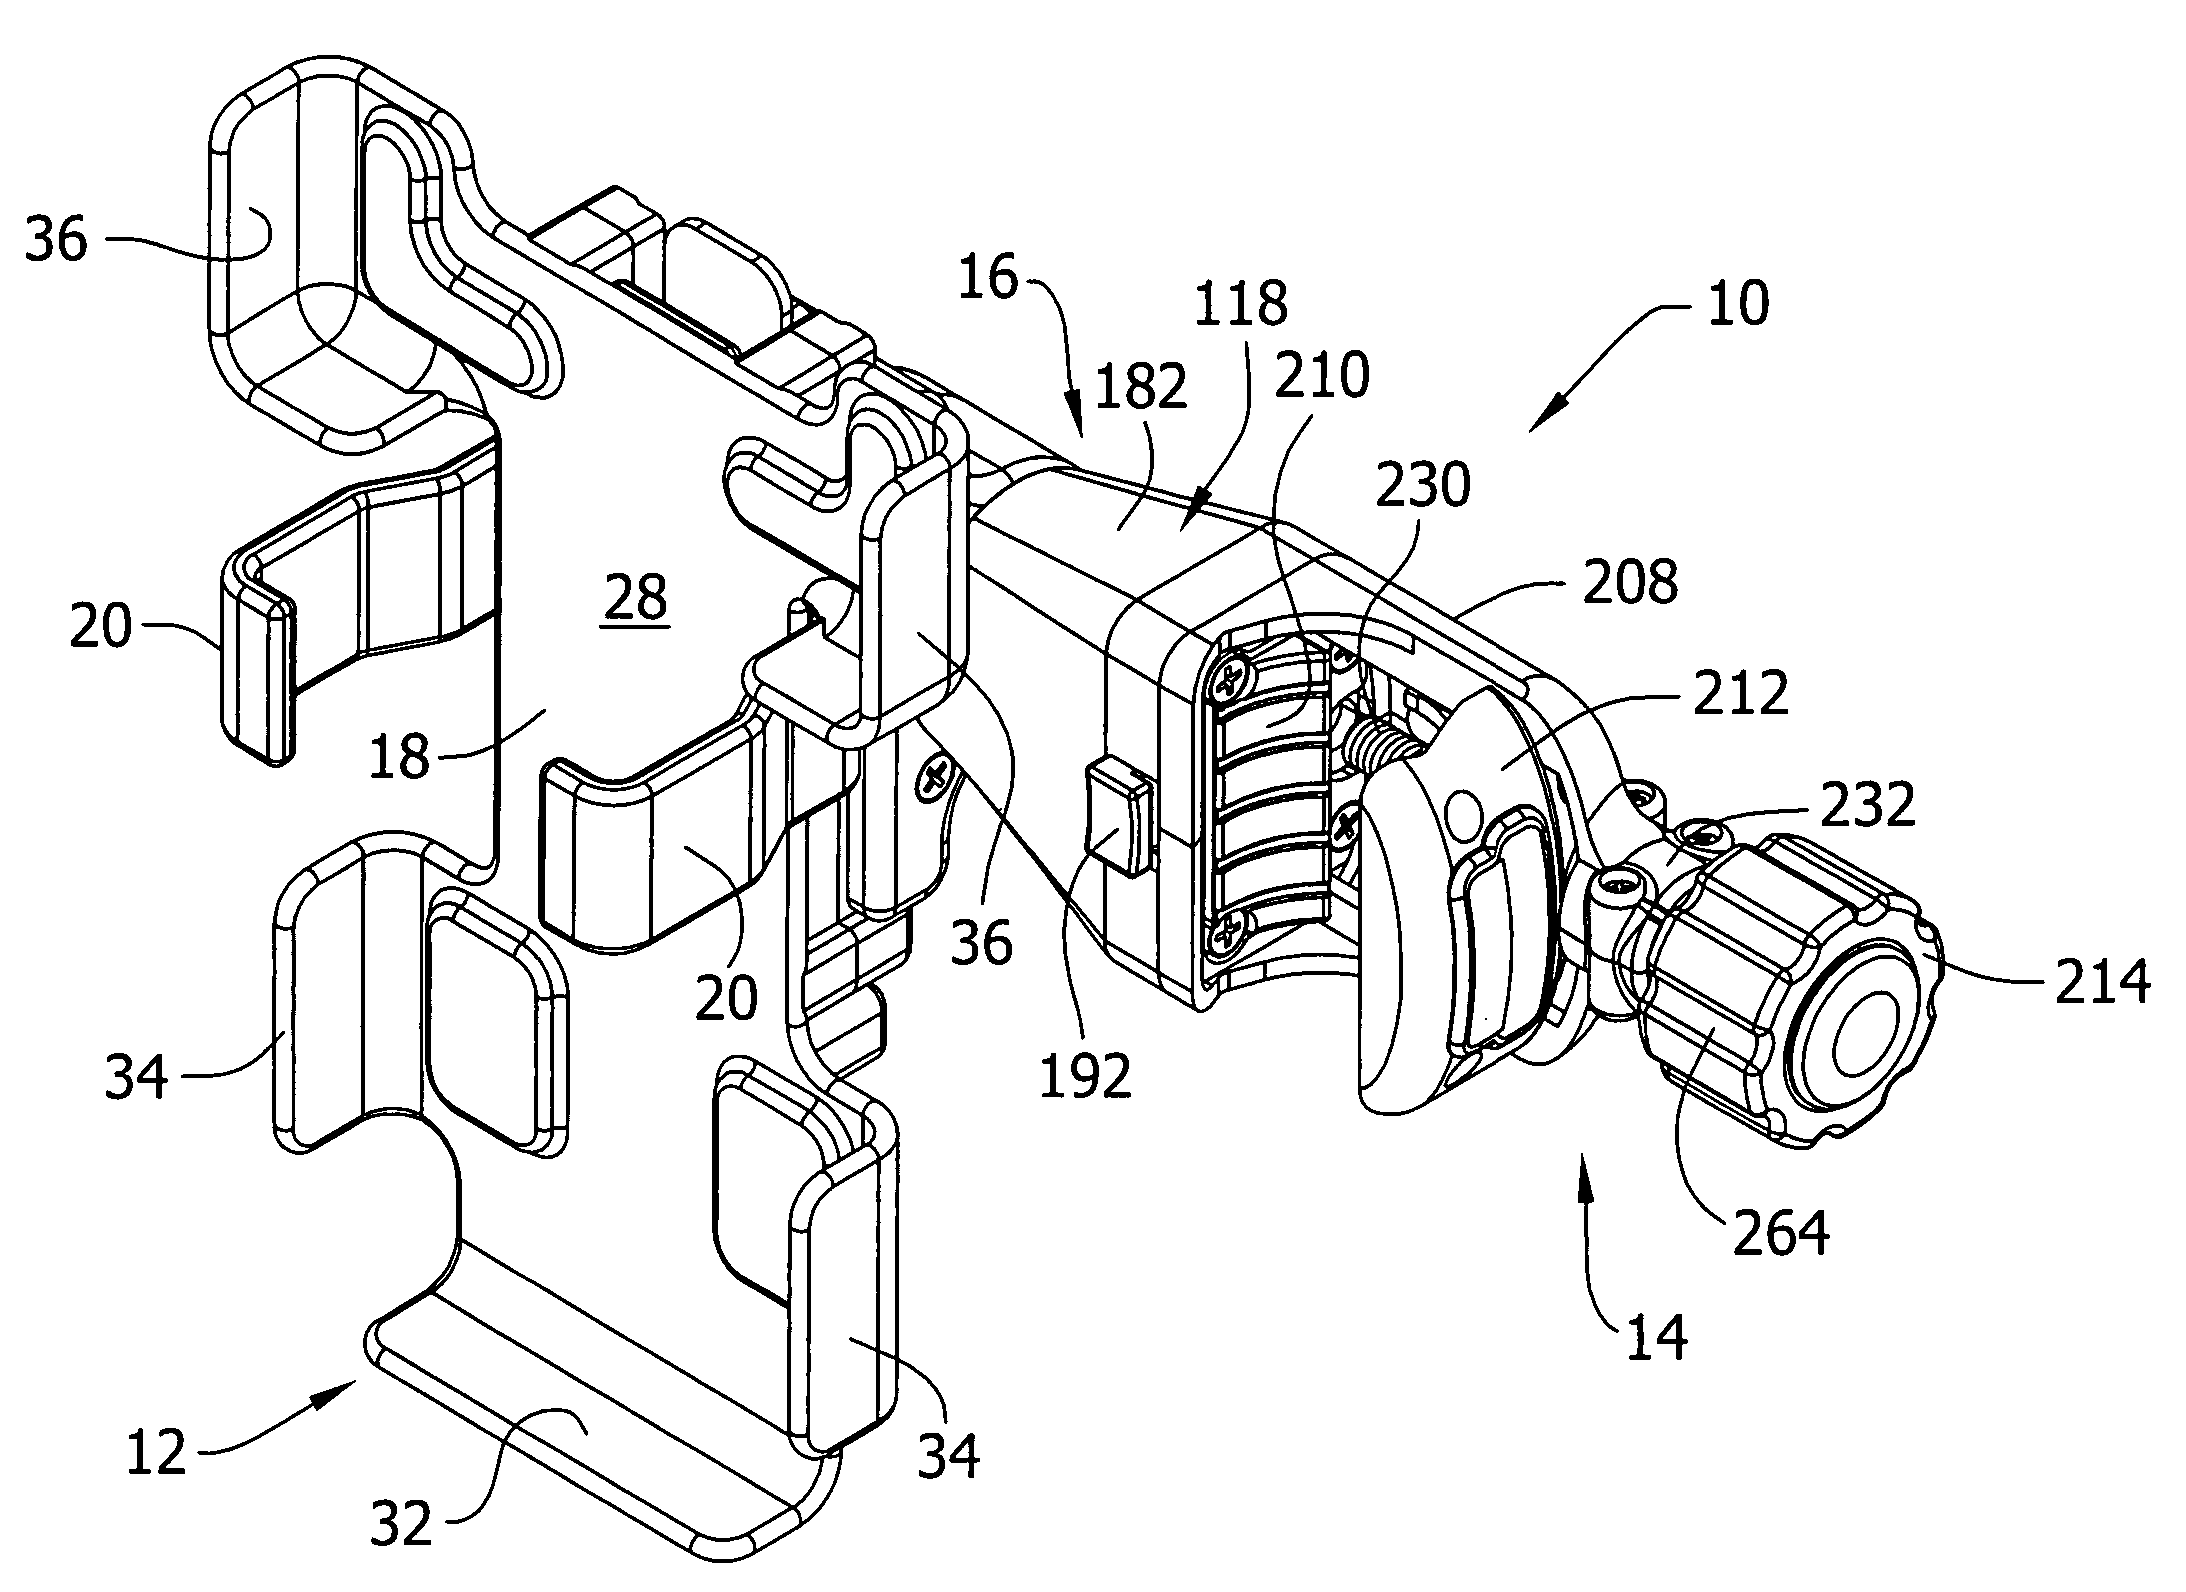 Mount system for handheld electrical device